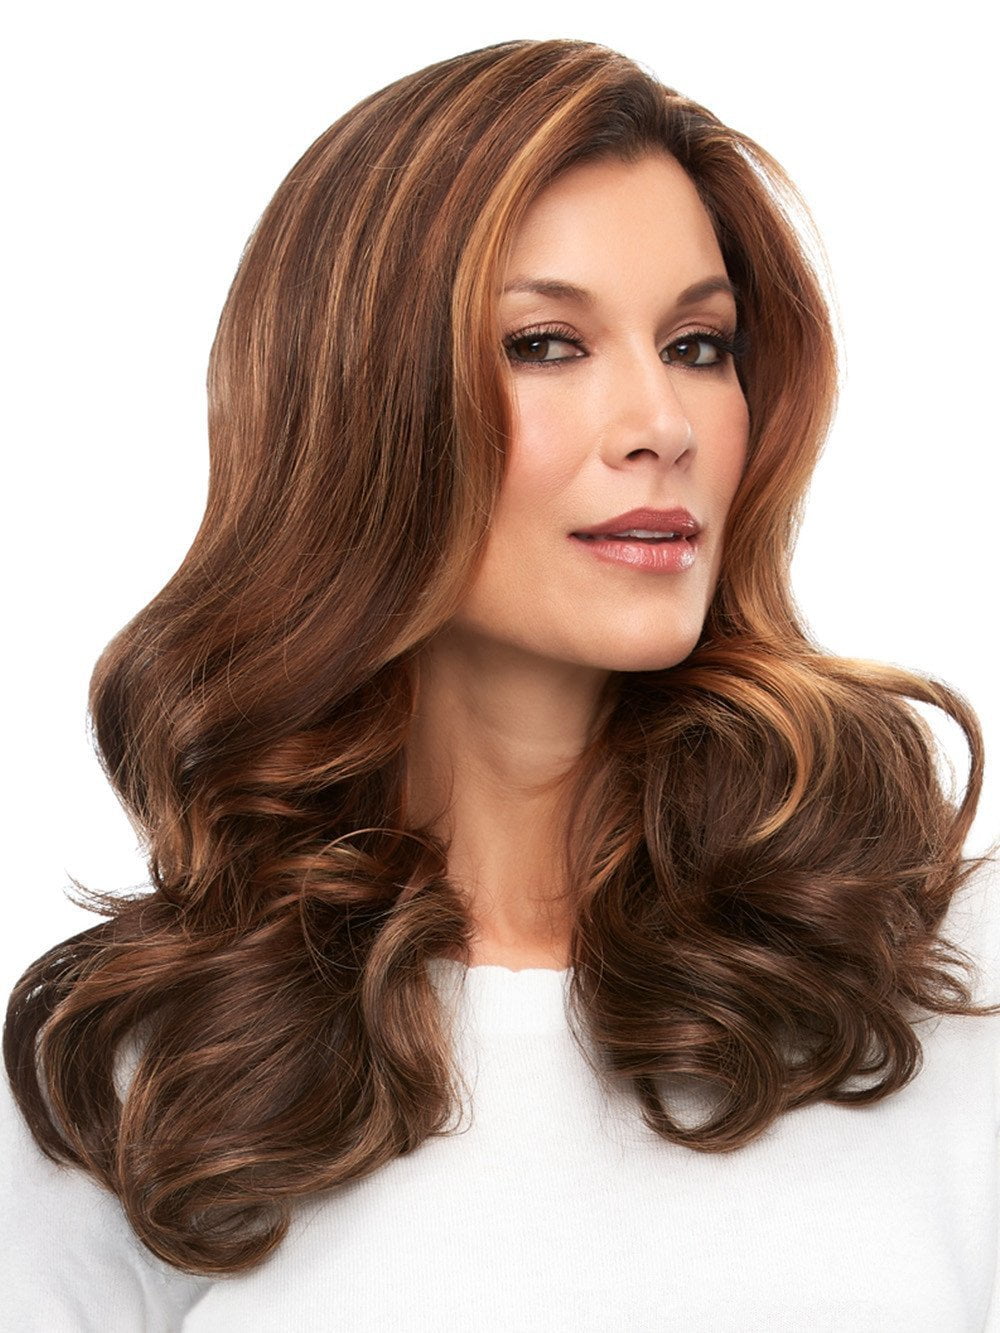 Worn over the part and adds volume to longer hair styles